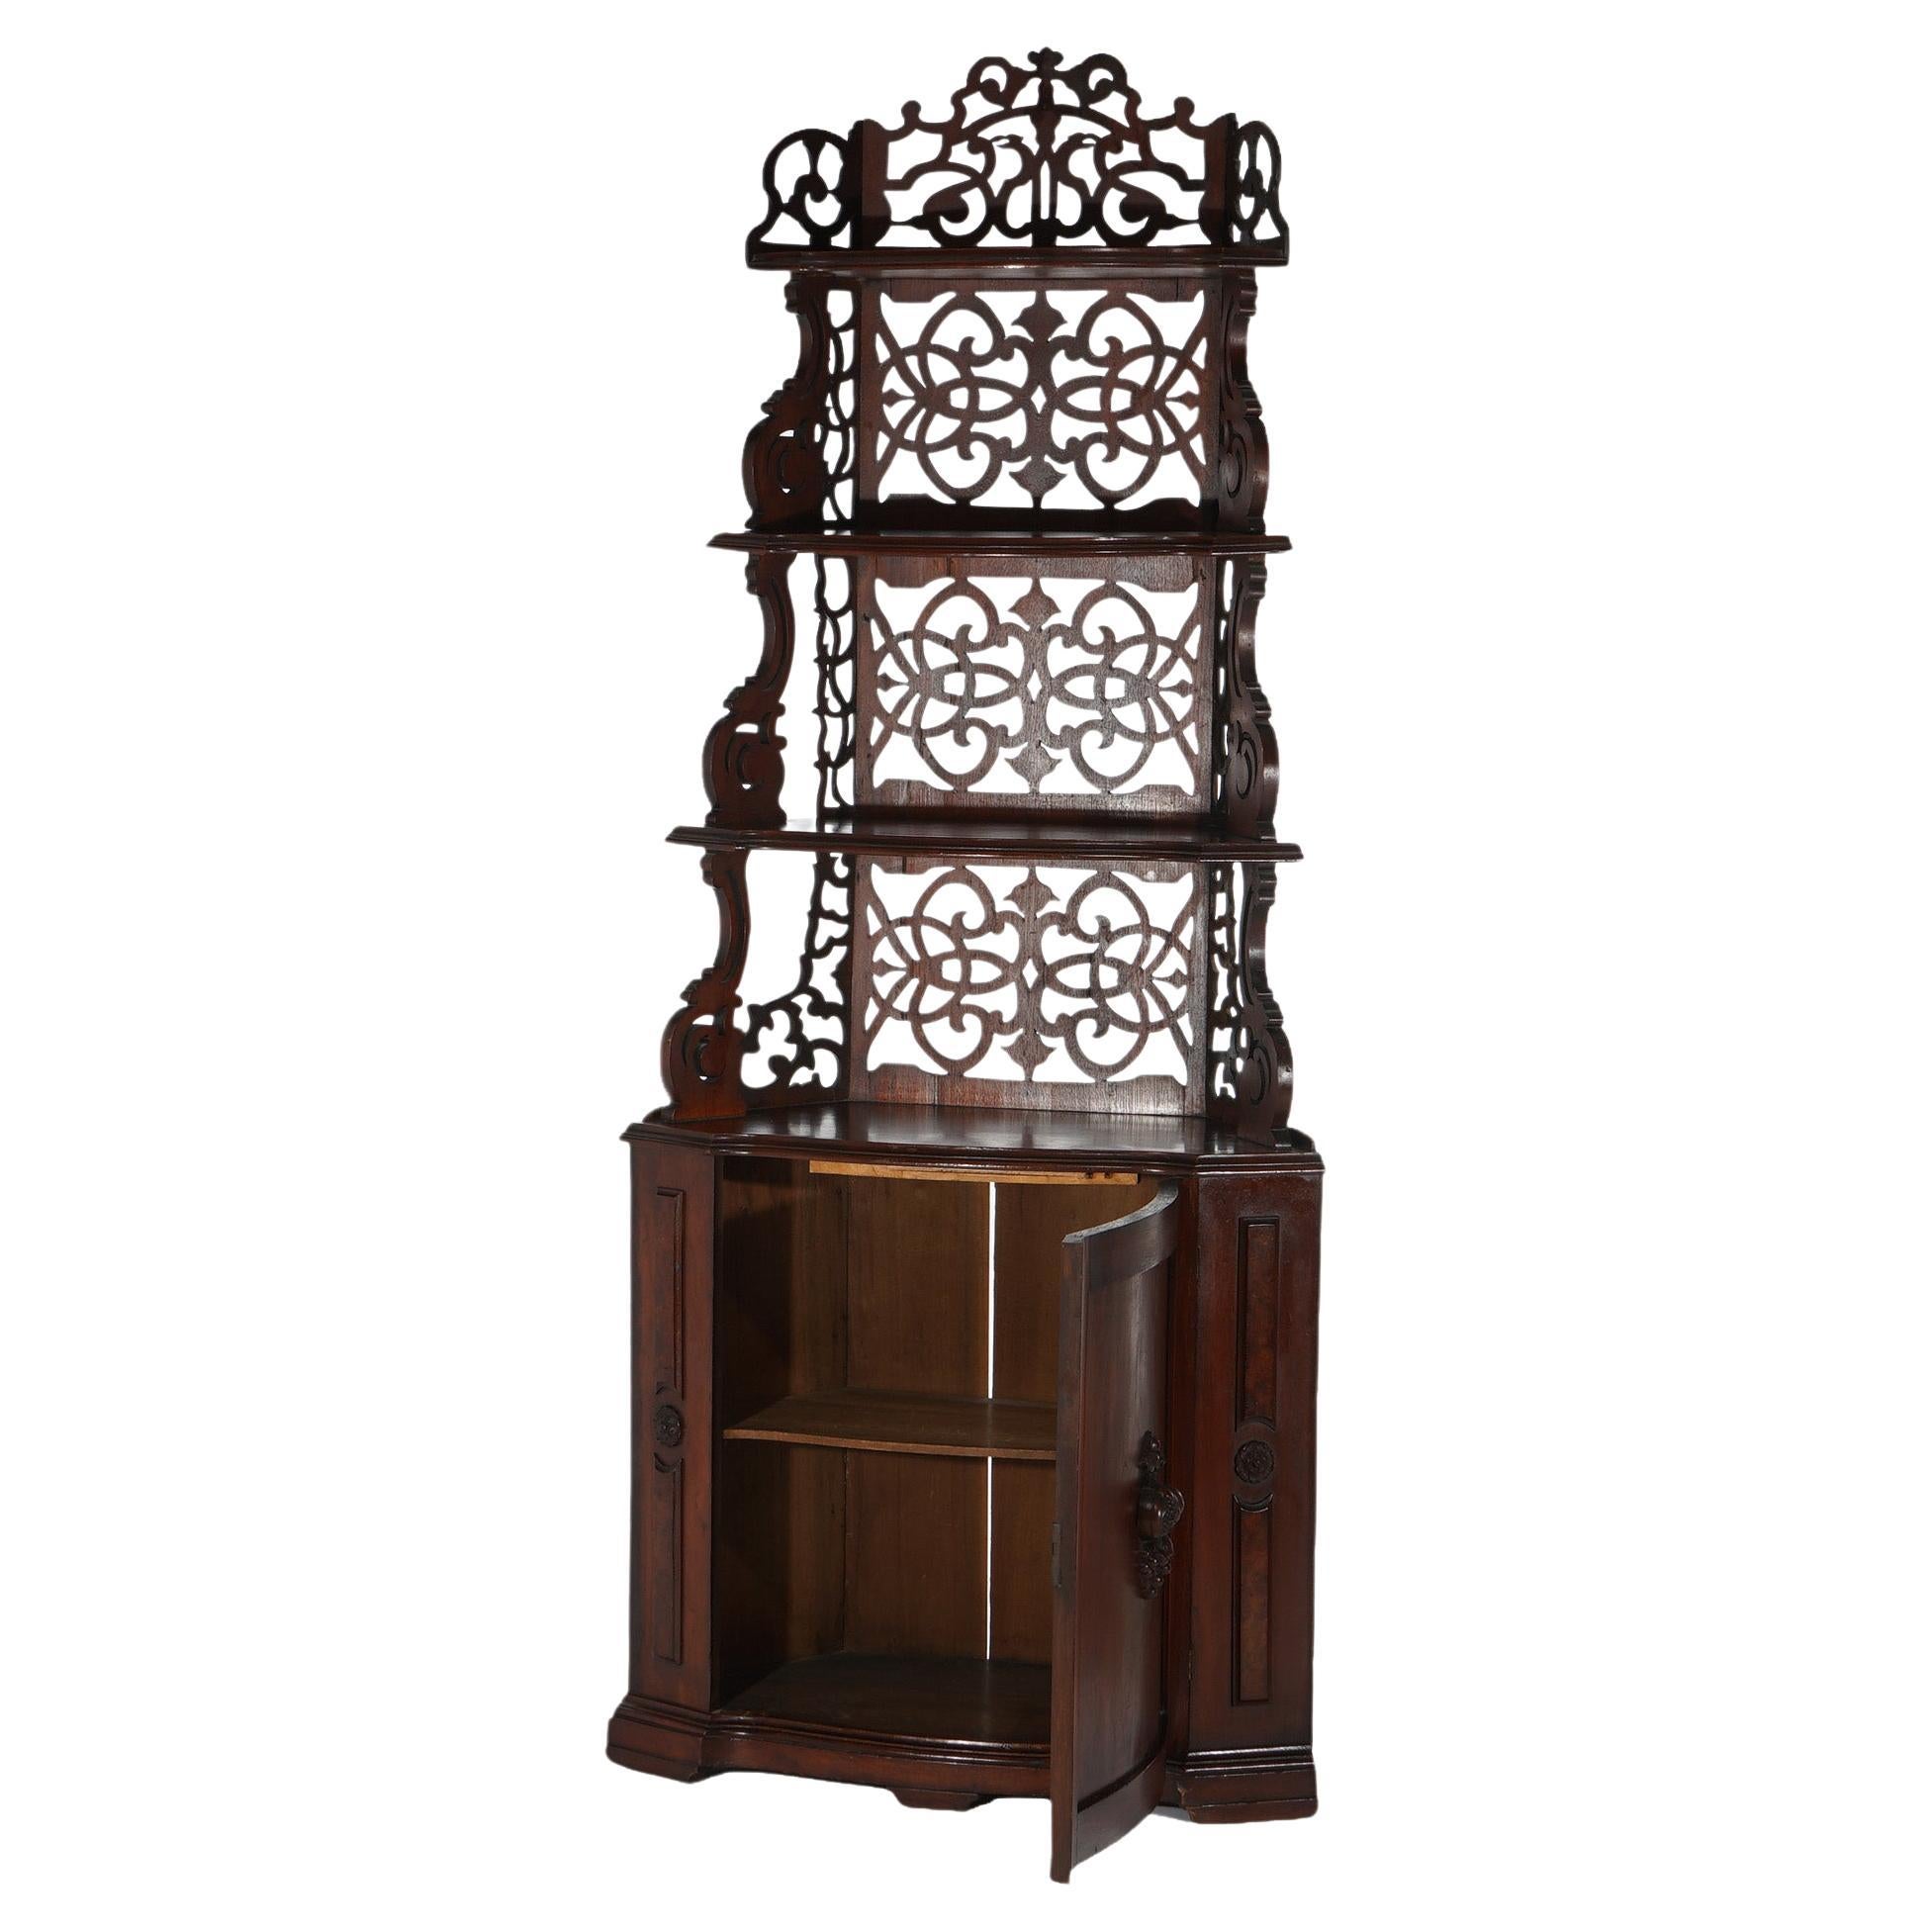 ***Ask About Reduced In-House Delivery Rates - Reliable Professional Service & Fully Insured***
Antique Victorian Walnut Etagere with Foliate Reticulated Back & Graduated Carved Shelving over Singe Door Lower Cabinet, c1870

Measures - 74.75